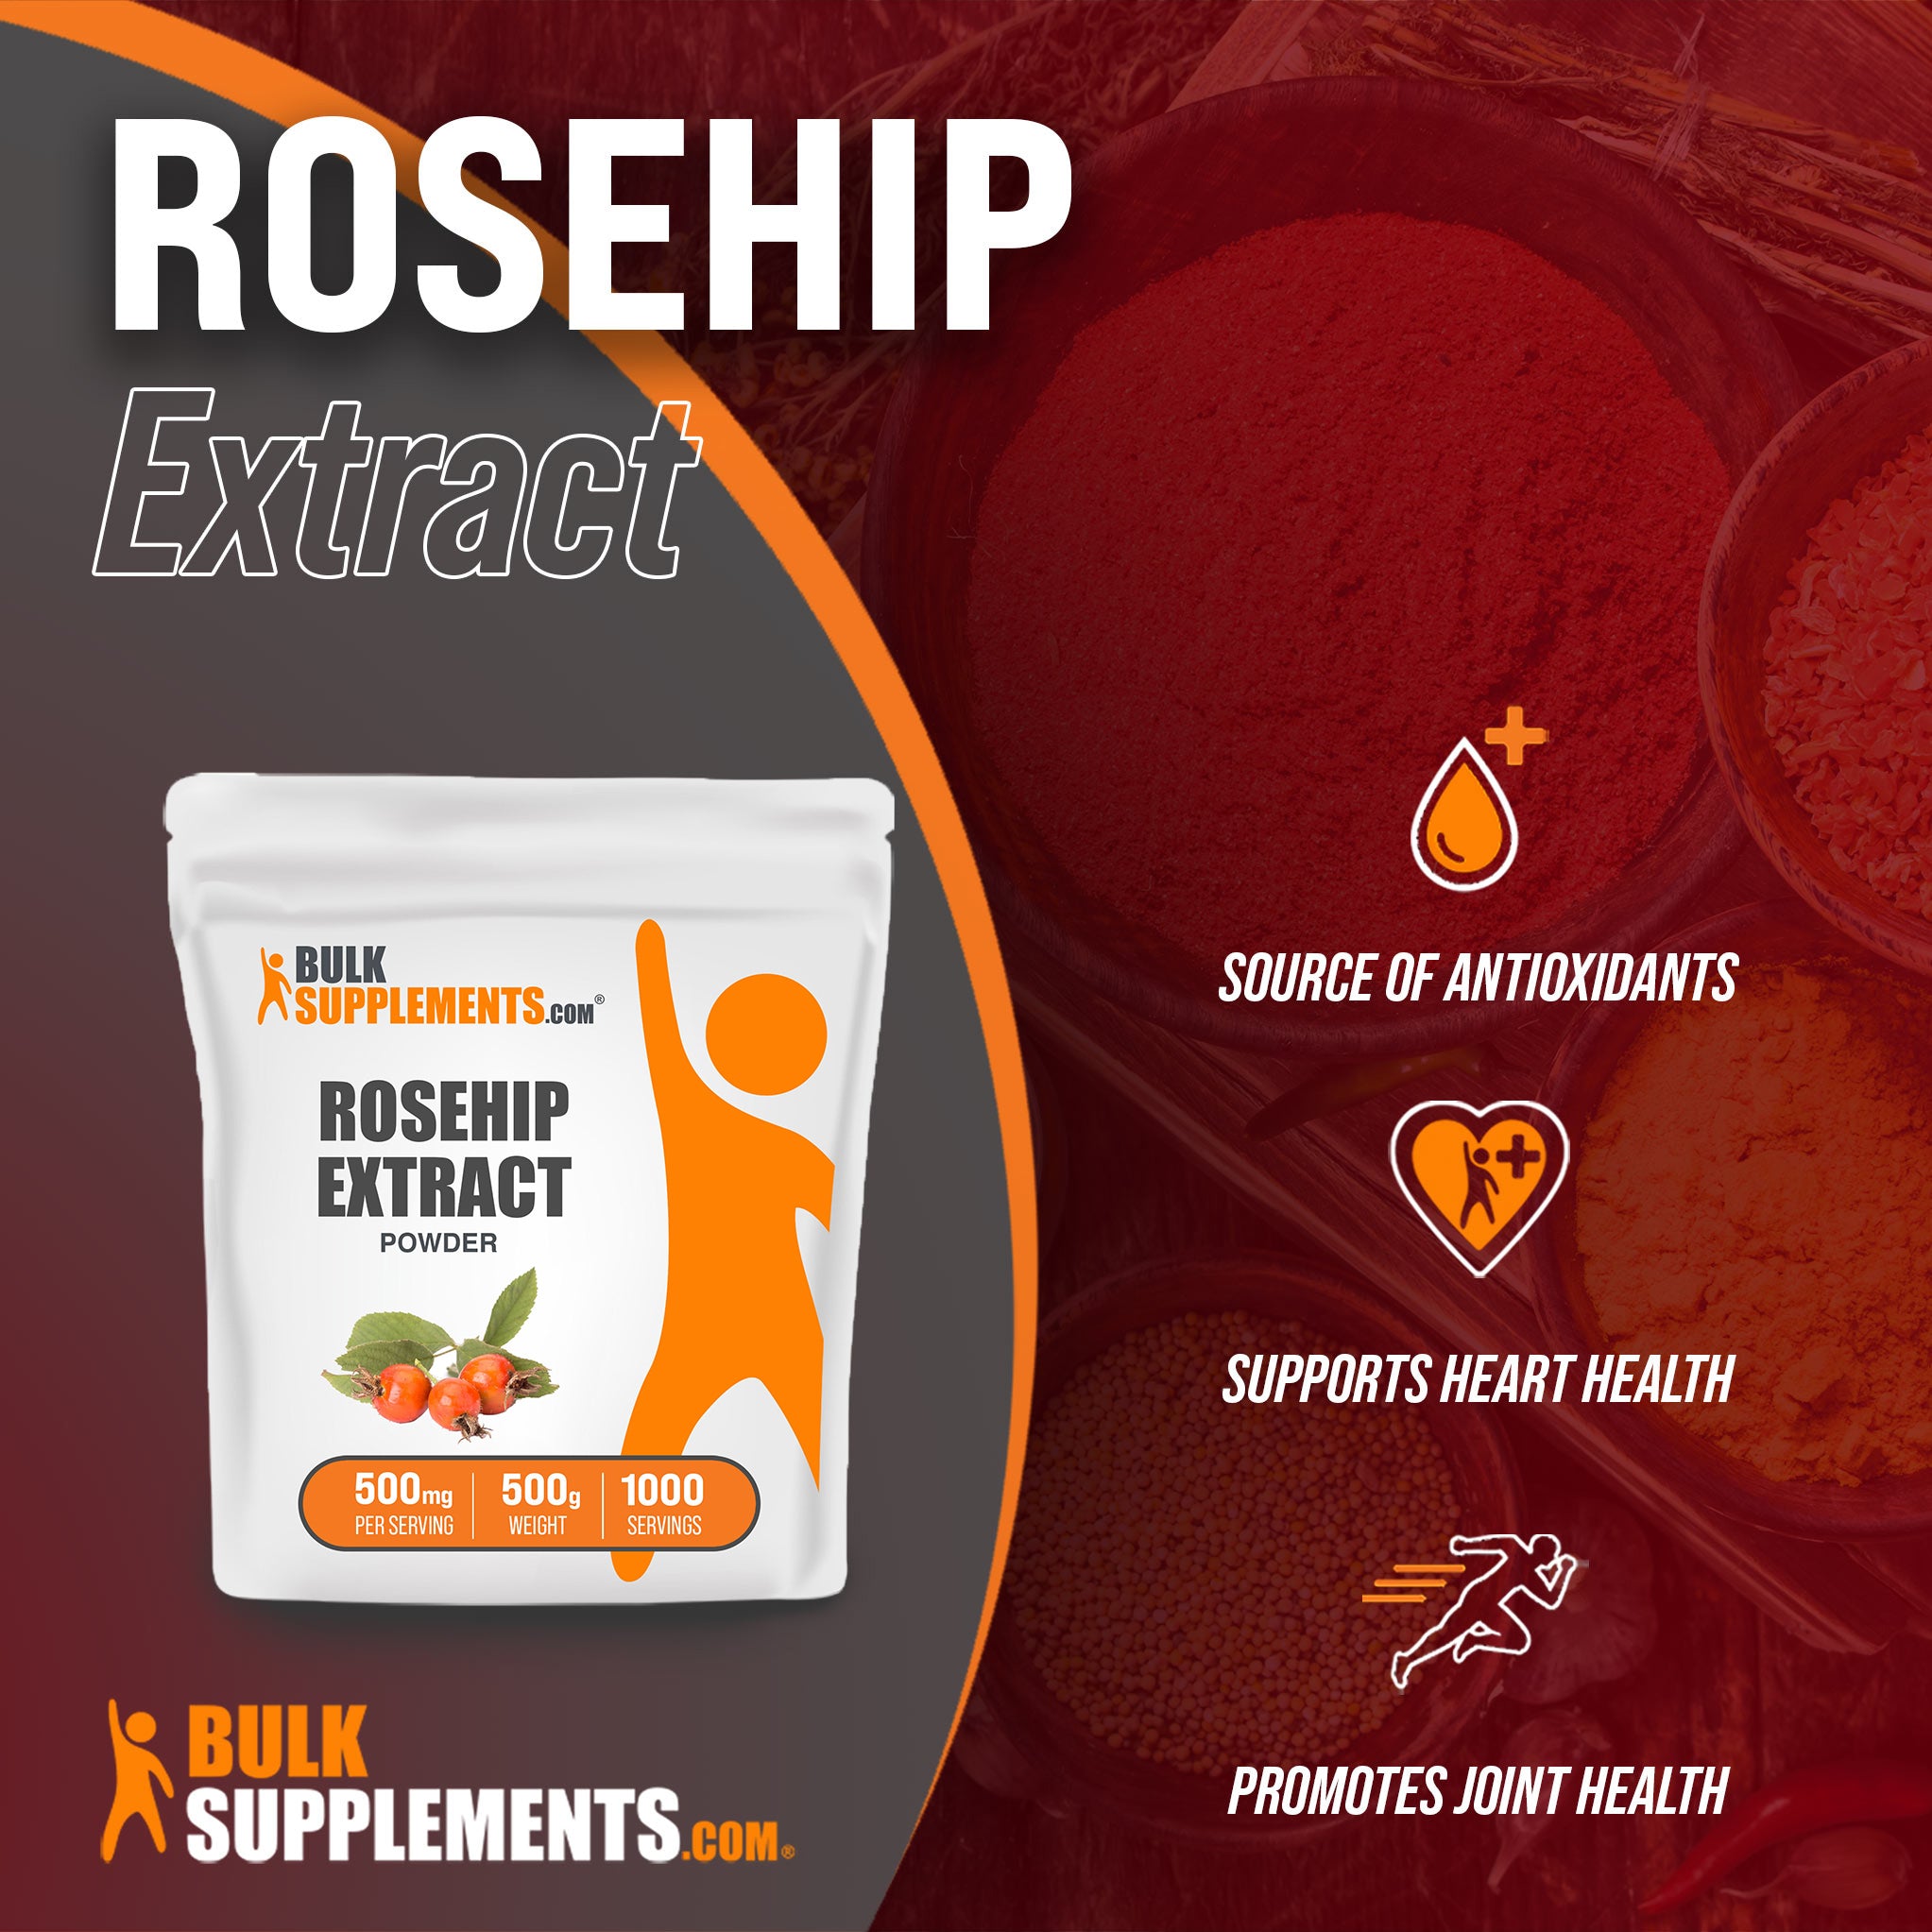 Benefits of Rosehip Extract: source of antioxidants, supports heart health, promotes joint health